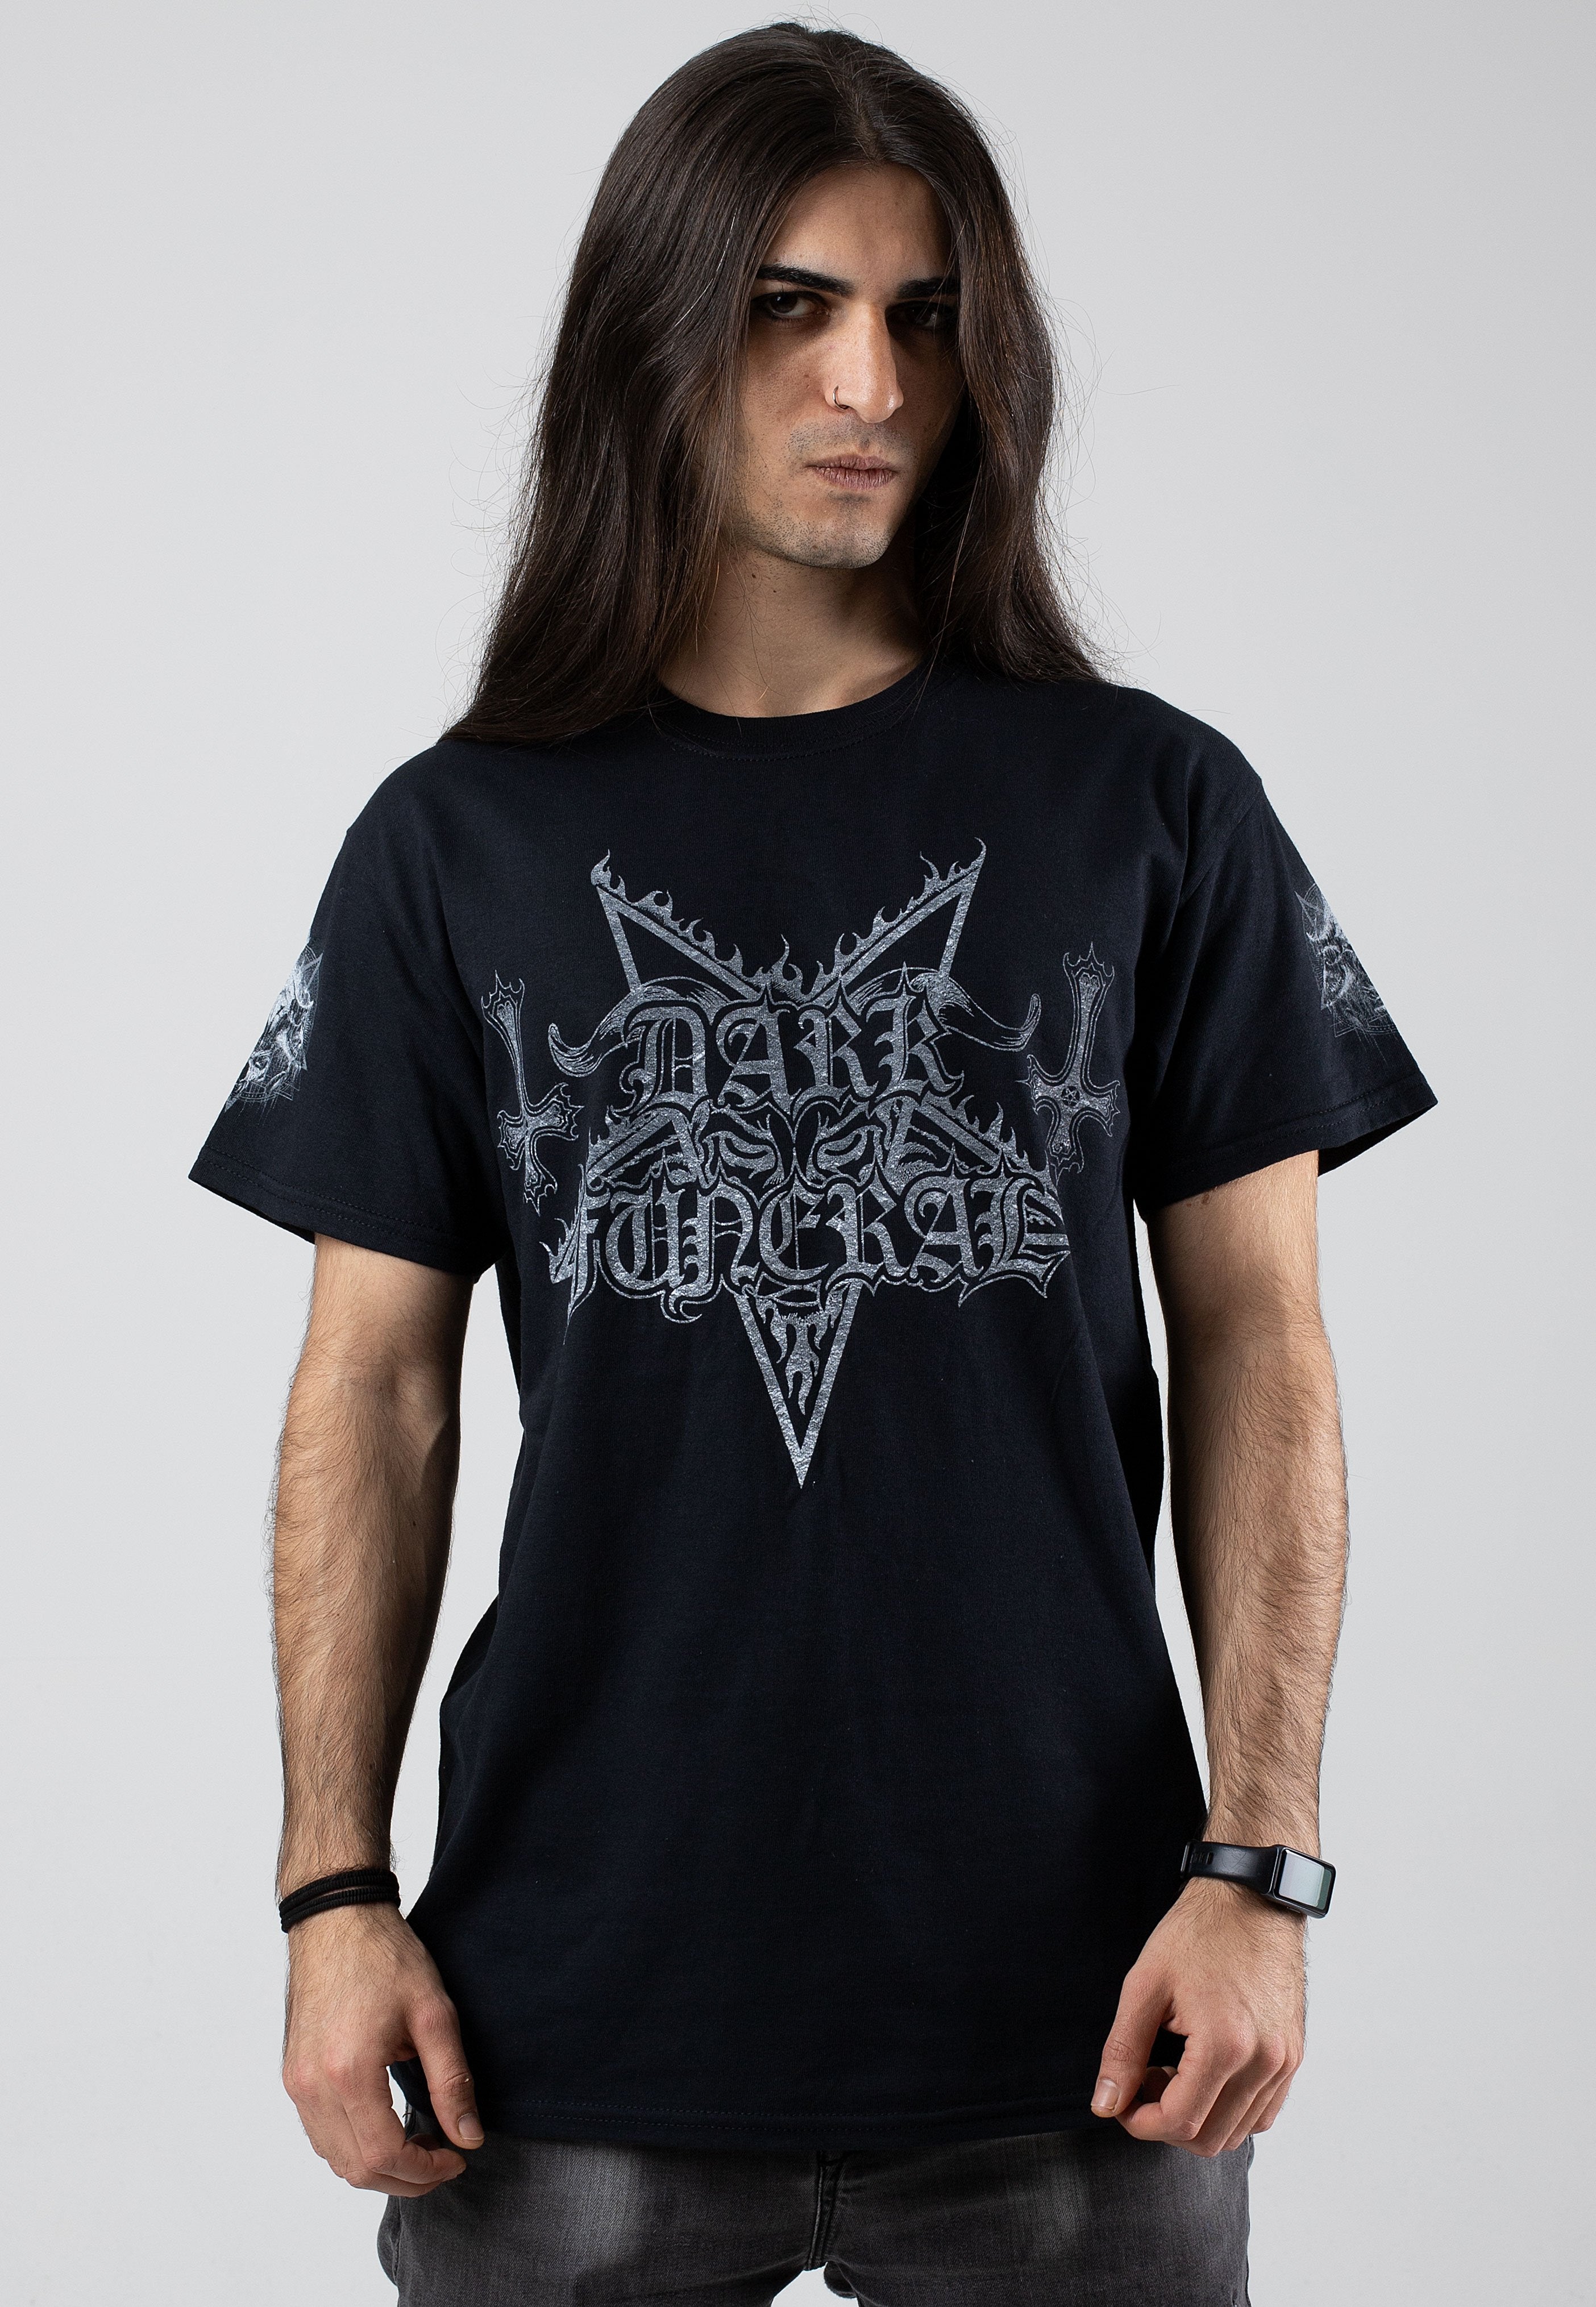 Dark Funeral - To Carve Another Wound - T-Shirt